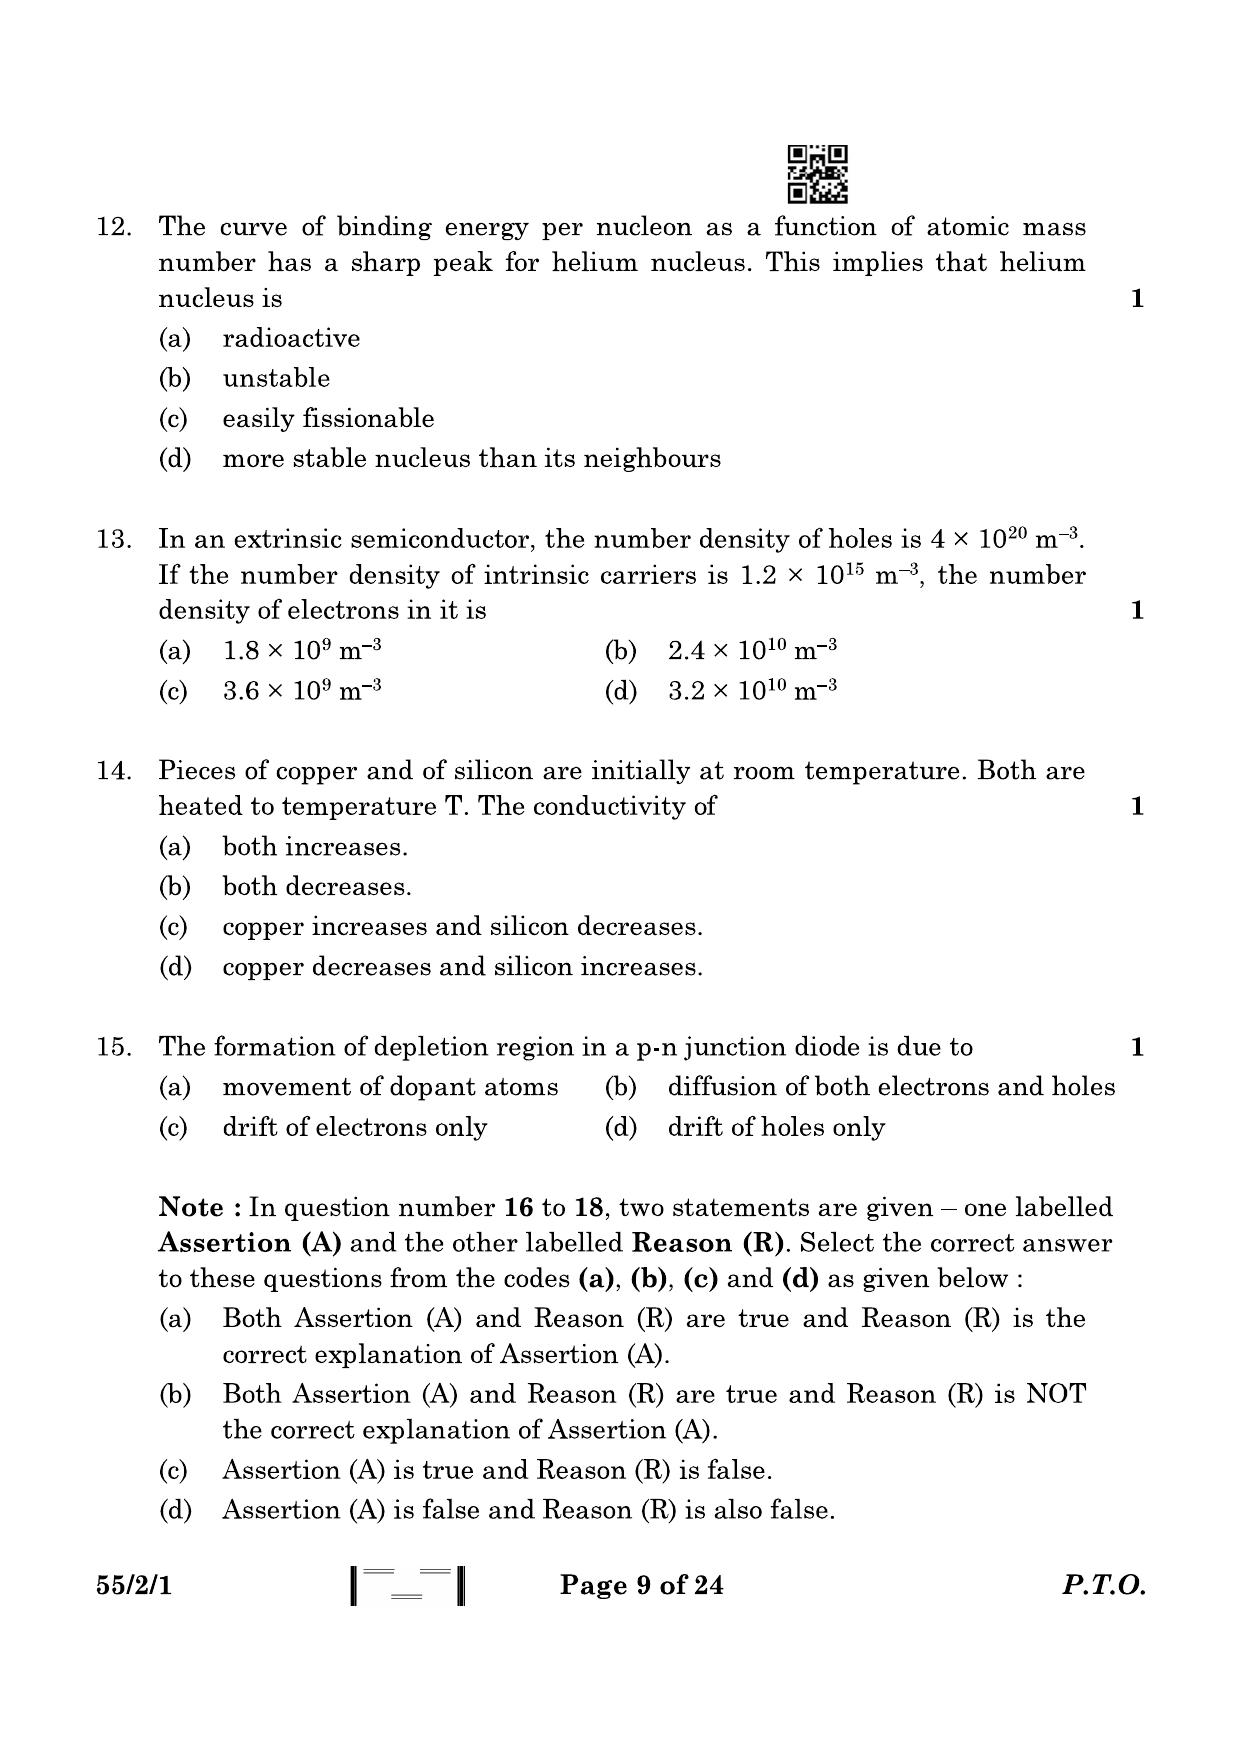 CBSE Class 12 55-2-1 Physics 2023 Question Paper - Page 9